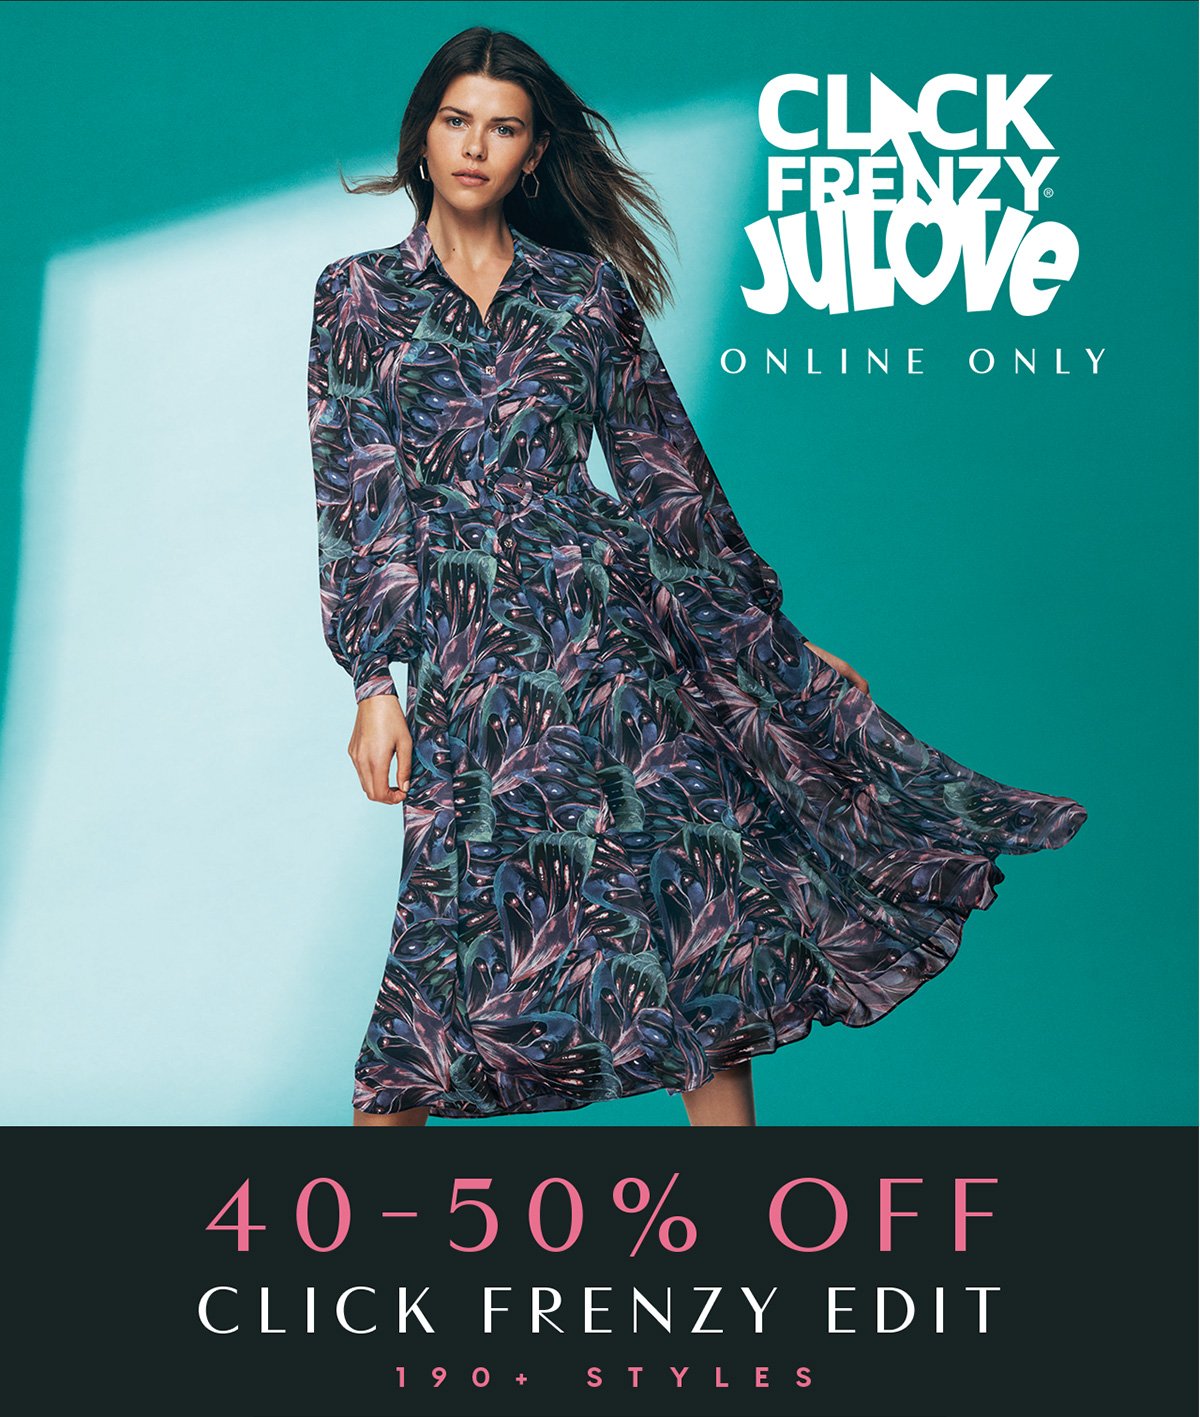 Online Only. Ends Tomorrow. Click Frenzy JuLove. 40 - 50% Off Click Frenzy Edit. 190+ Styles.